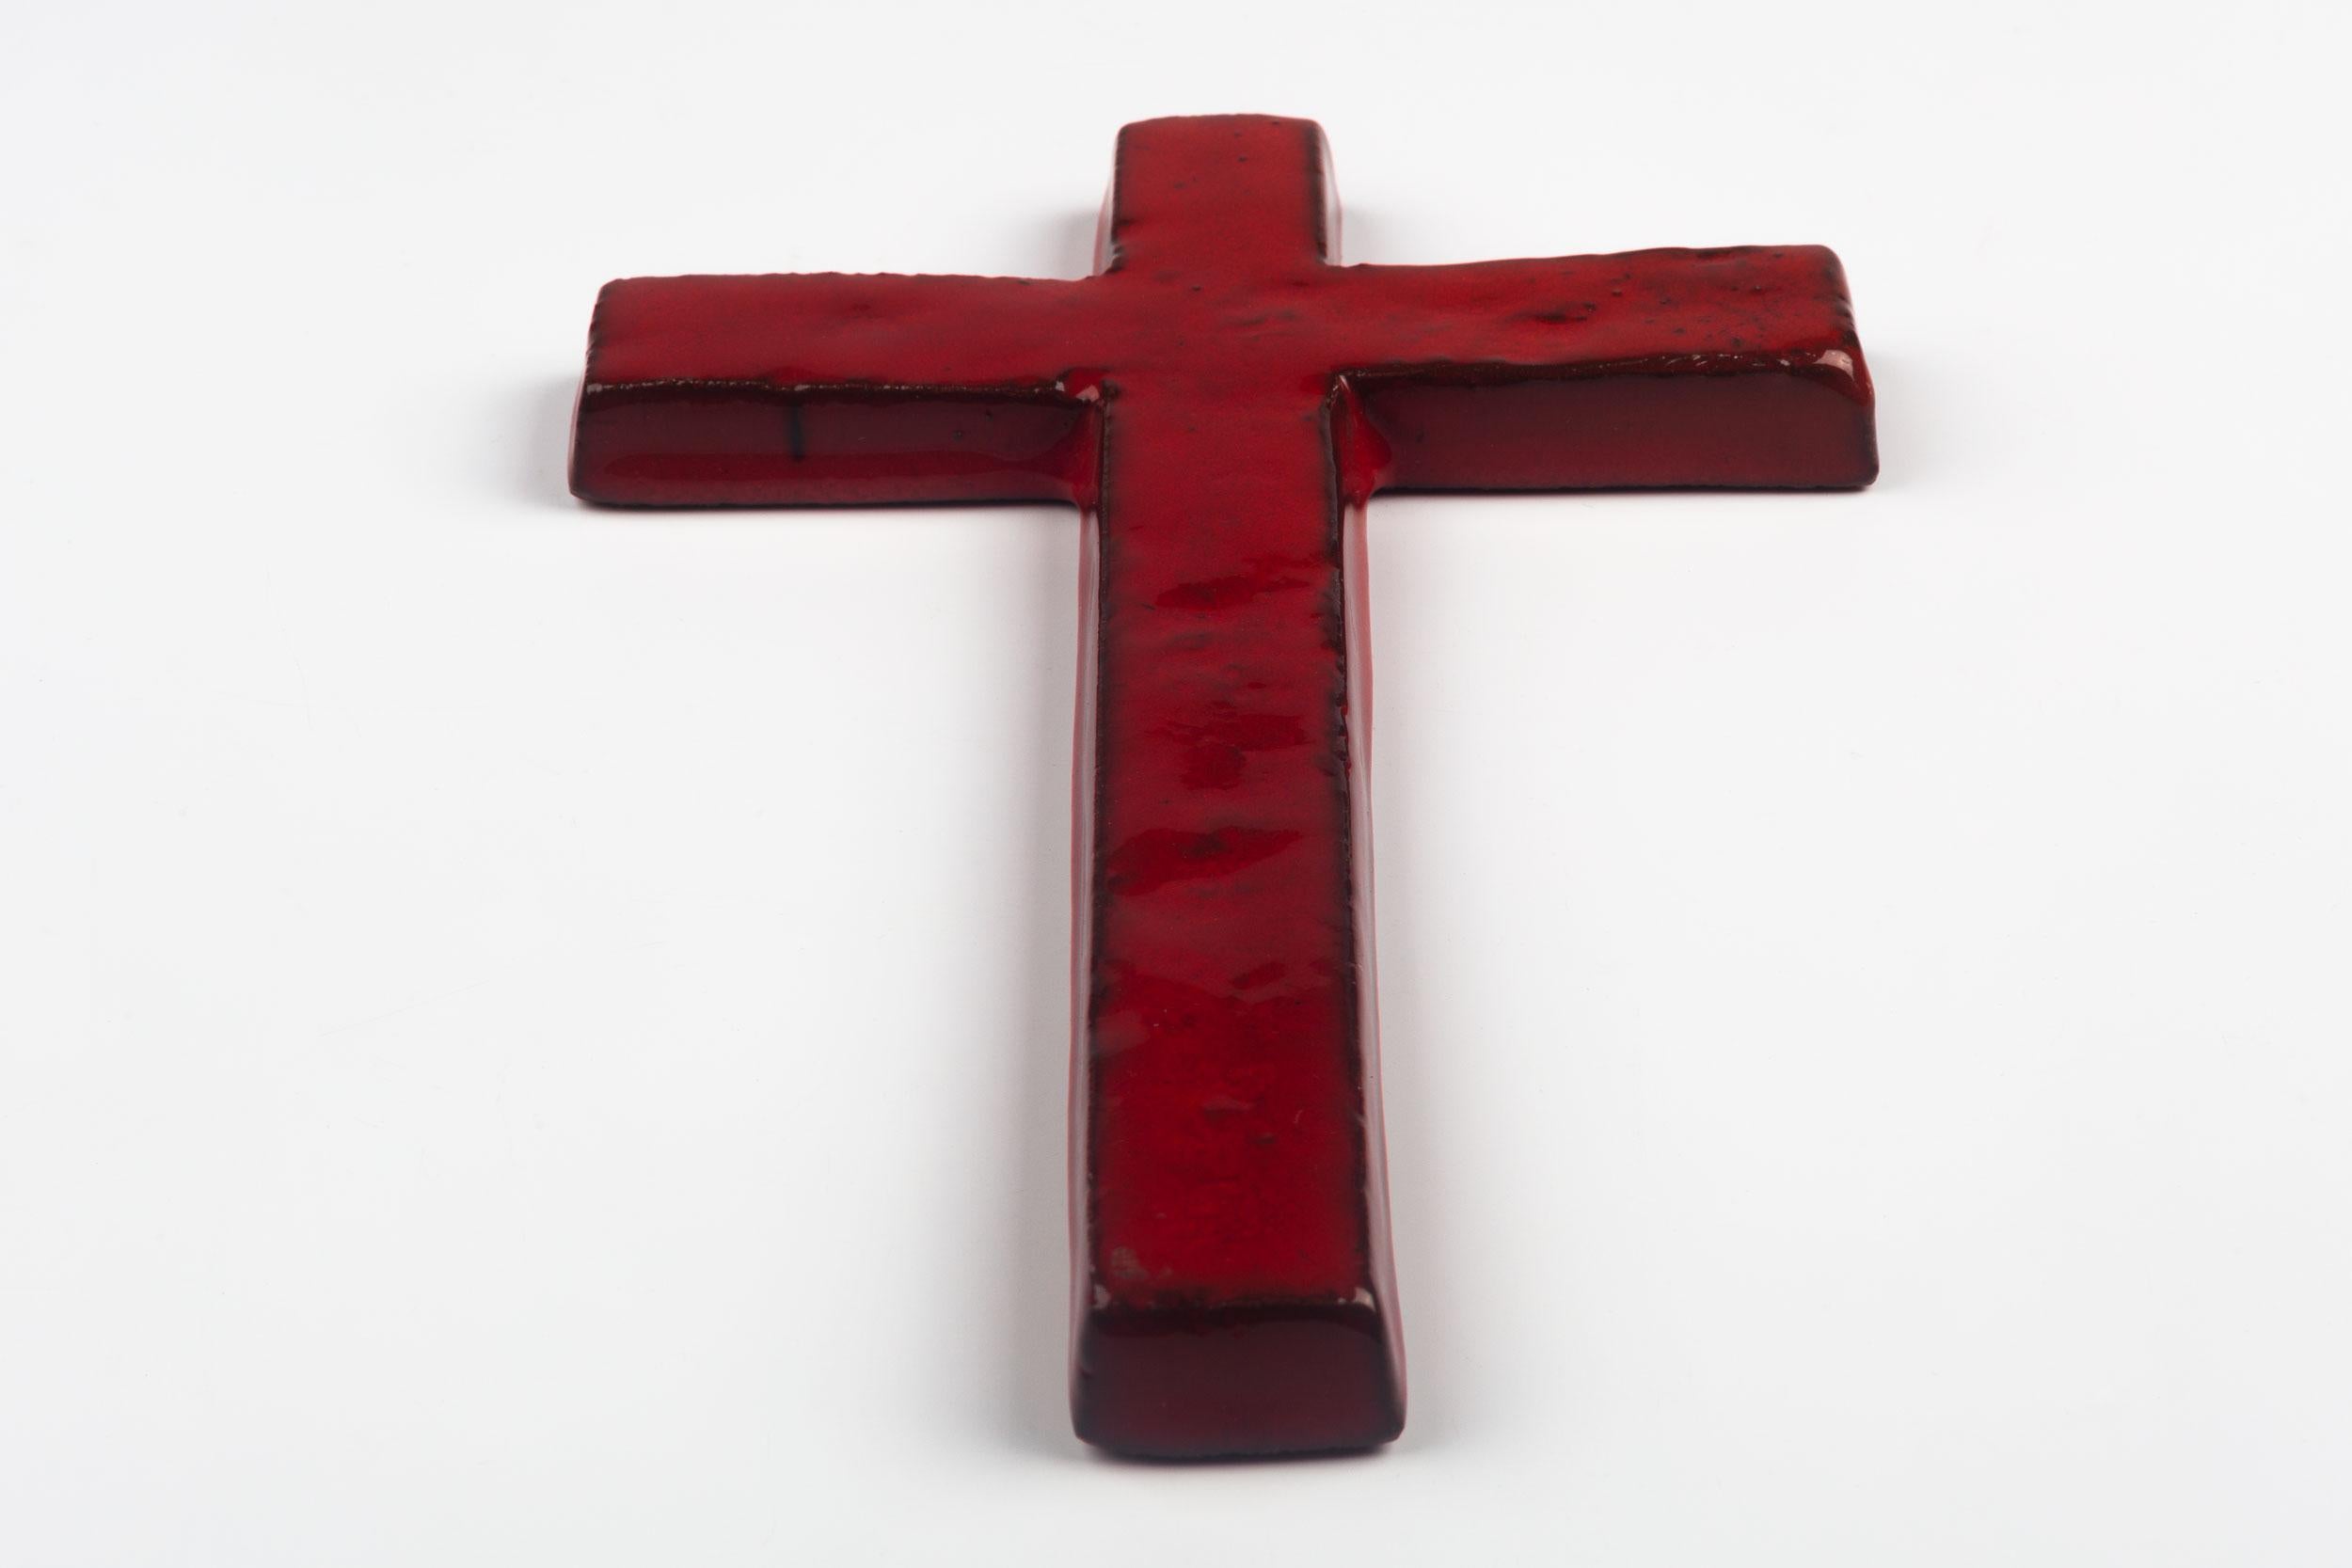 Midcentury European ceramic wall cross in red glazed ceramic and with black textural details in and around the border of the cross. From a large collection of crosses handmade by Flemish artisans. 

From modernism to brutalism, the crosses in our